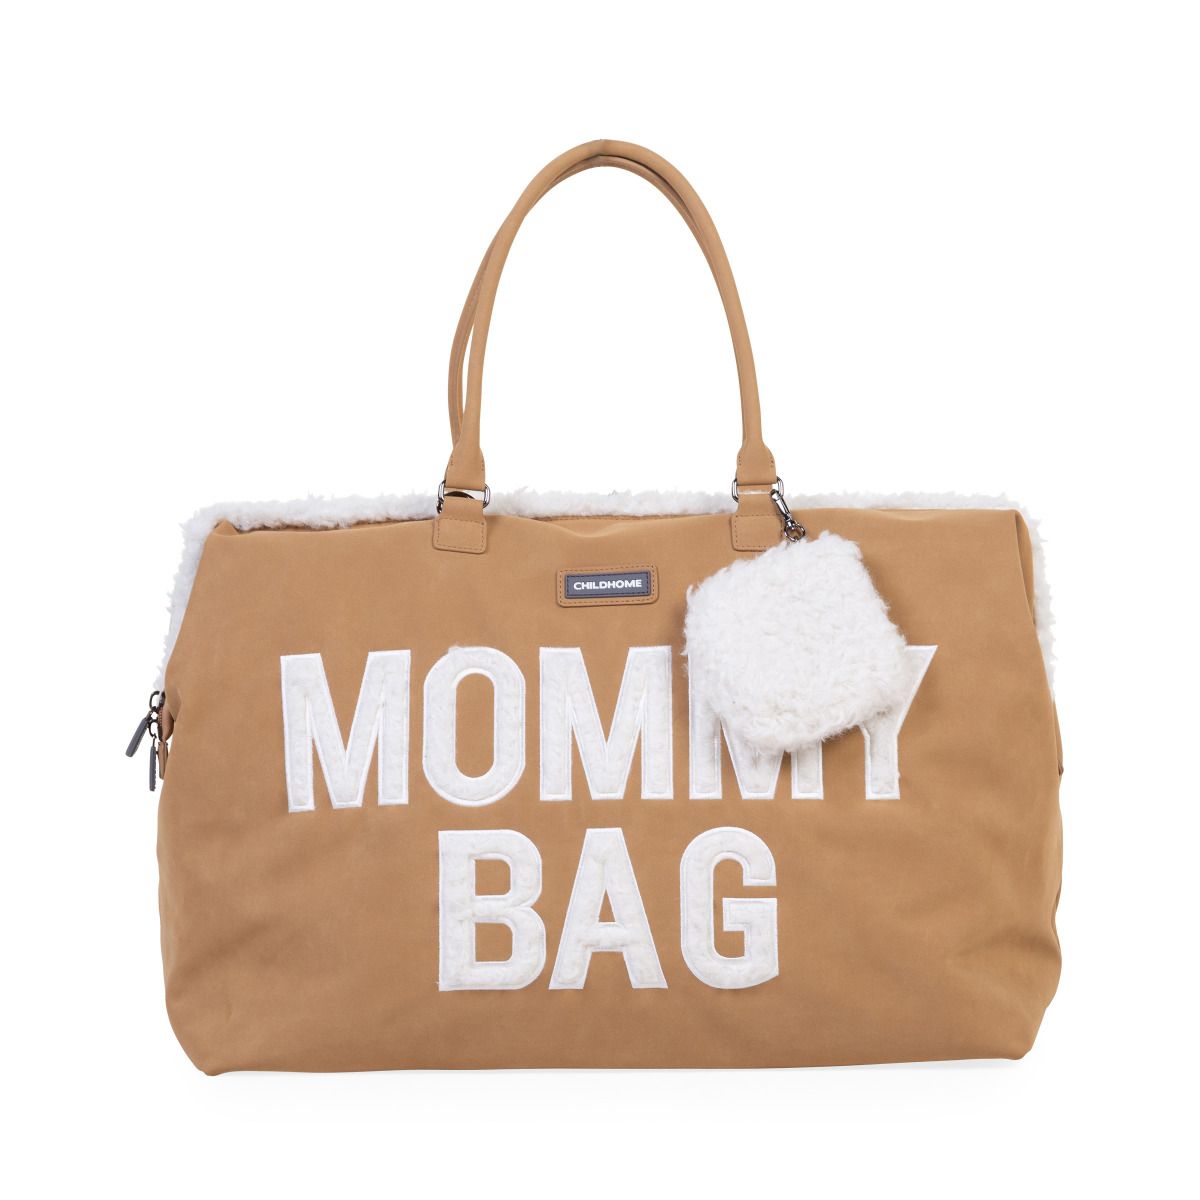 MOMMY BAG ® - SUEDE-LOOK - NEW COLOR!